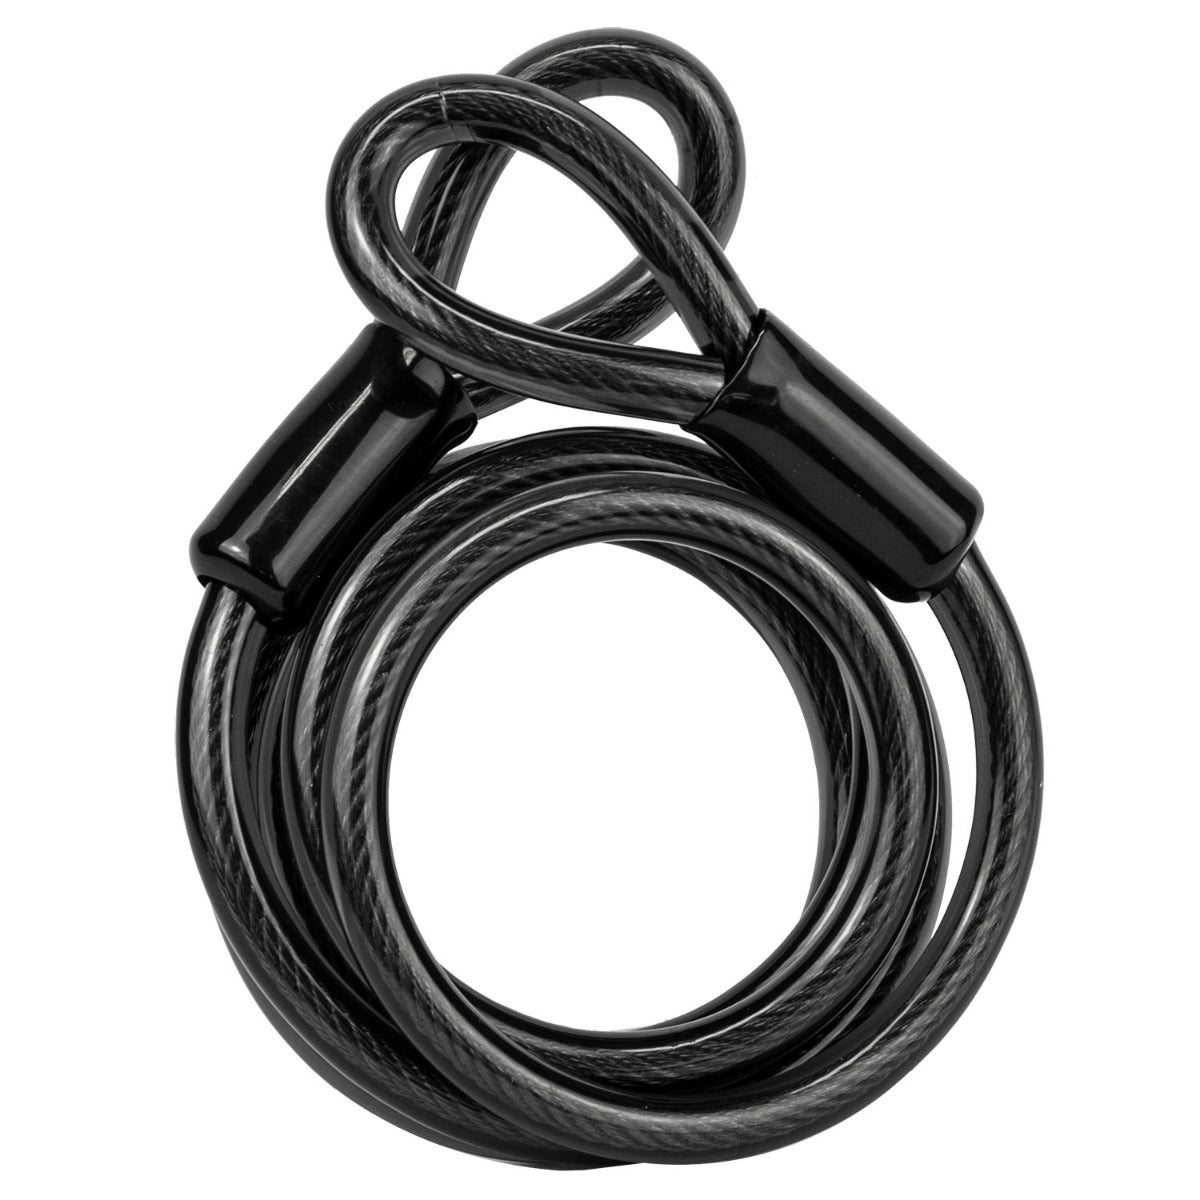 Bicycle Lock Cable - 1.5m